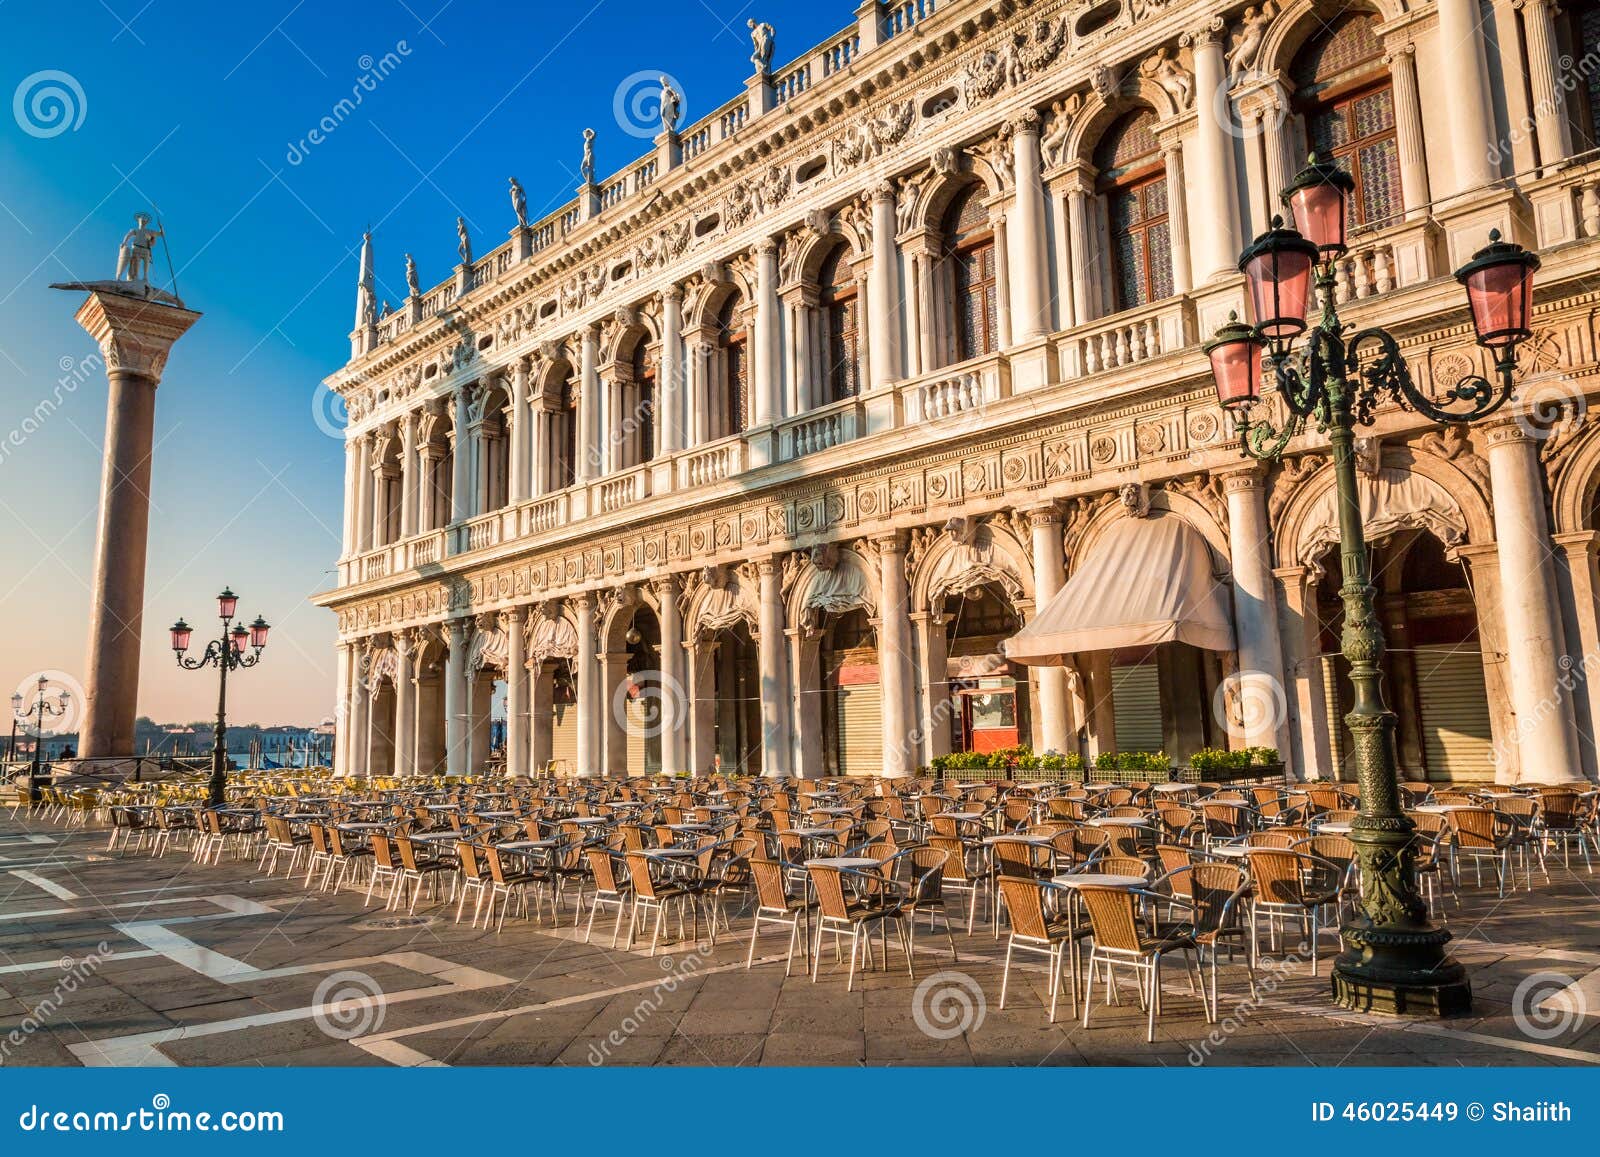 Restaurant before Opening on St. Mark S Square in Venice Stock Image